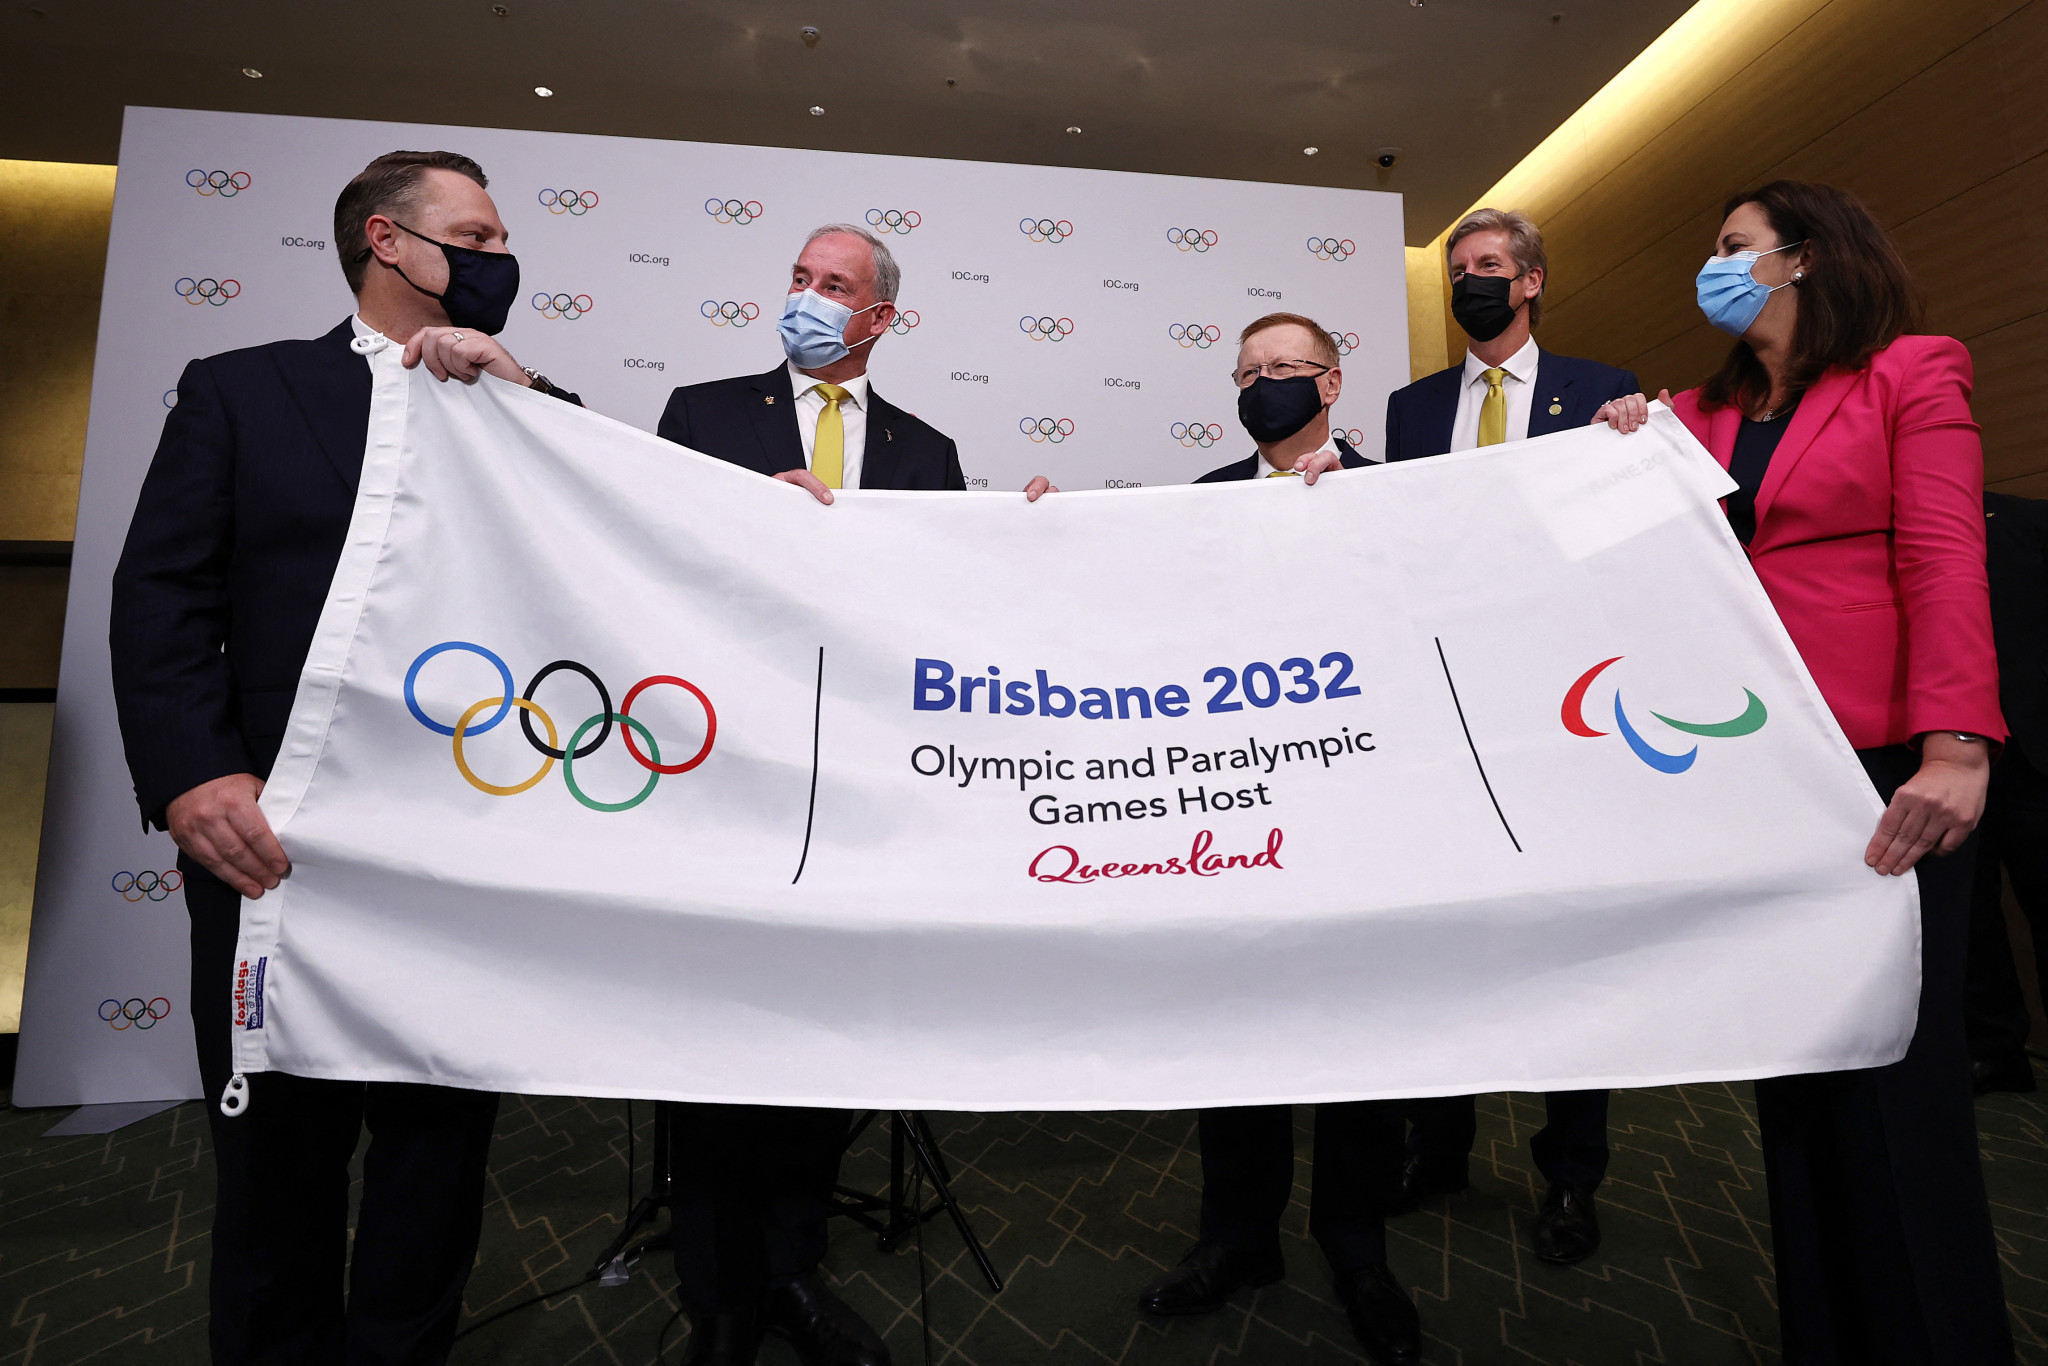 Brisbane 2032 organisers were accused of hypocrisy by Sir Bob Geldof after claiming they would stage the first ever climate-positive Games ©Getty Images